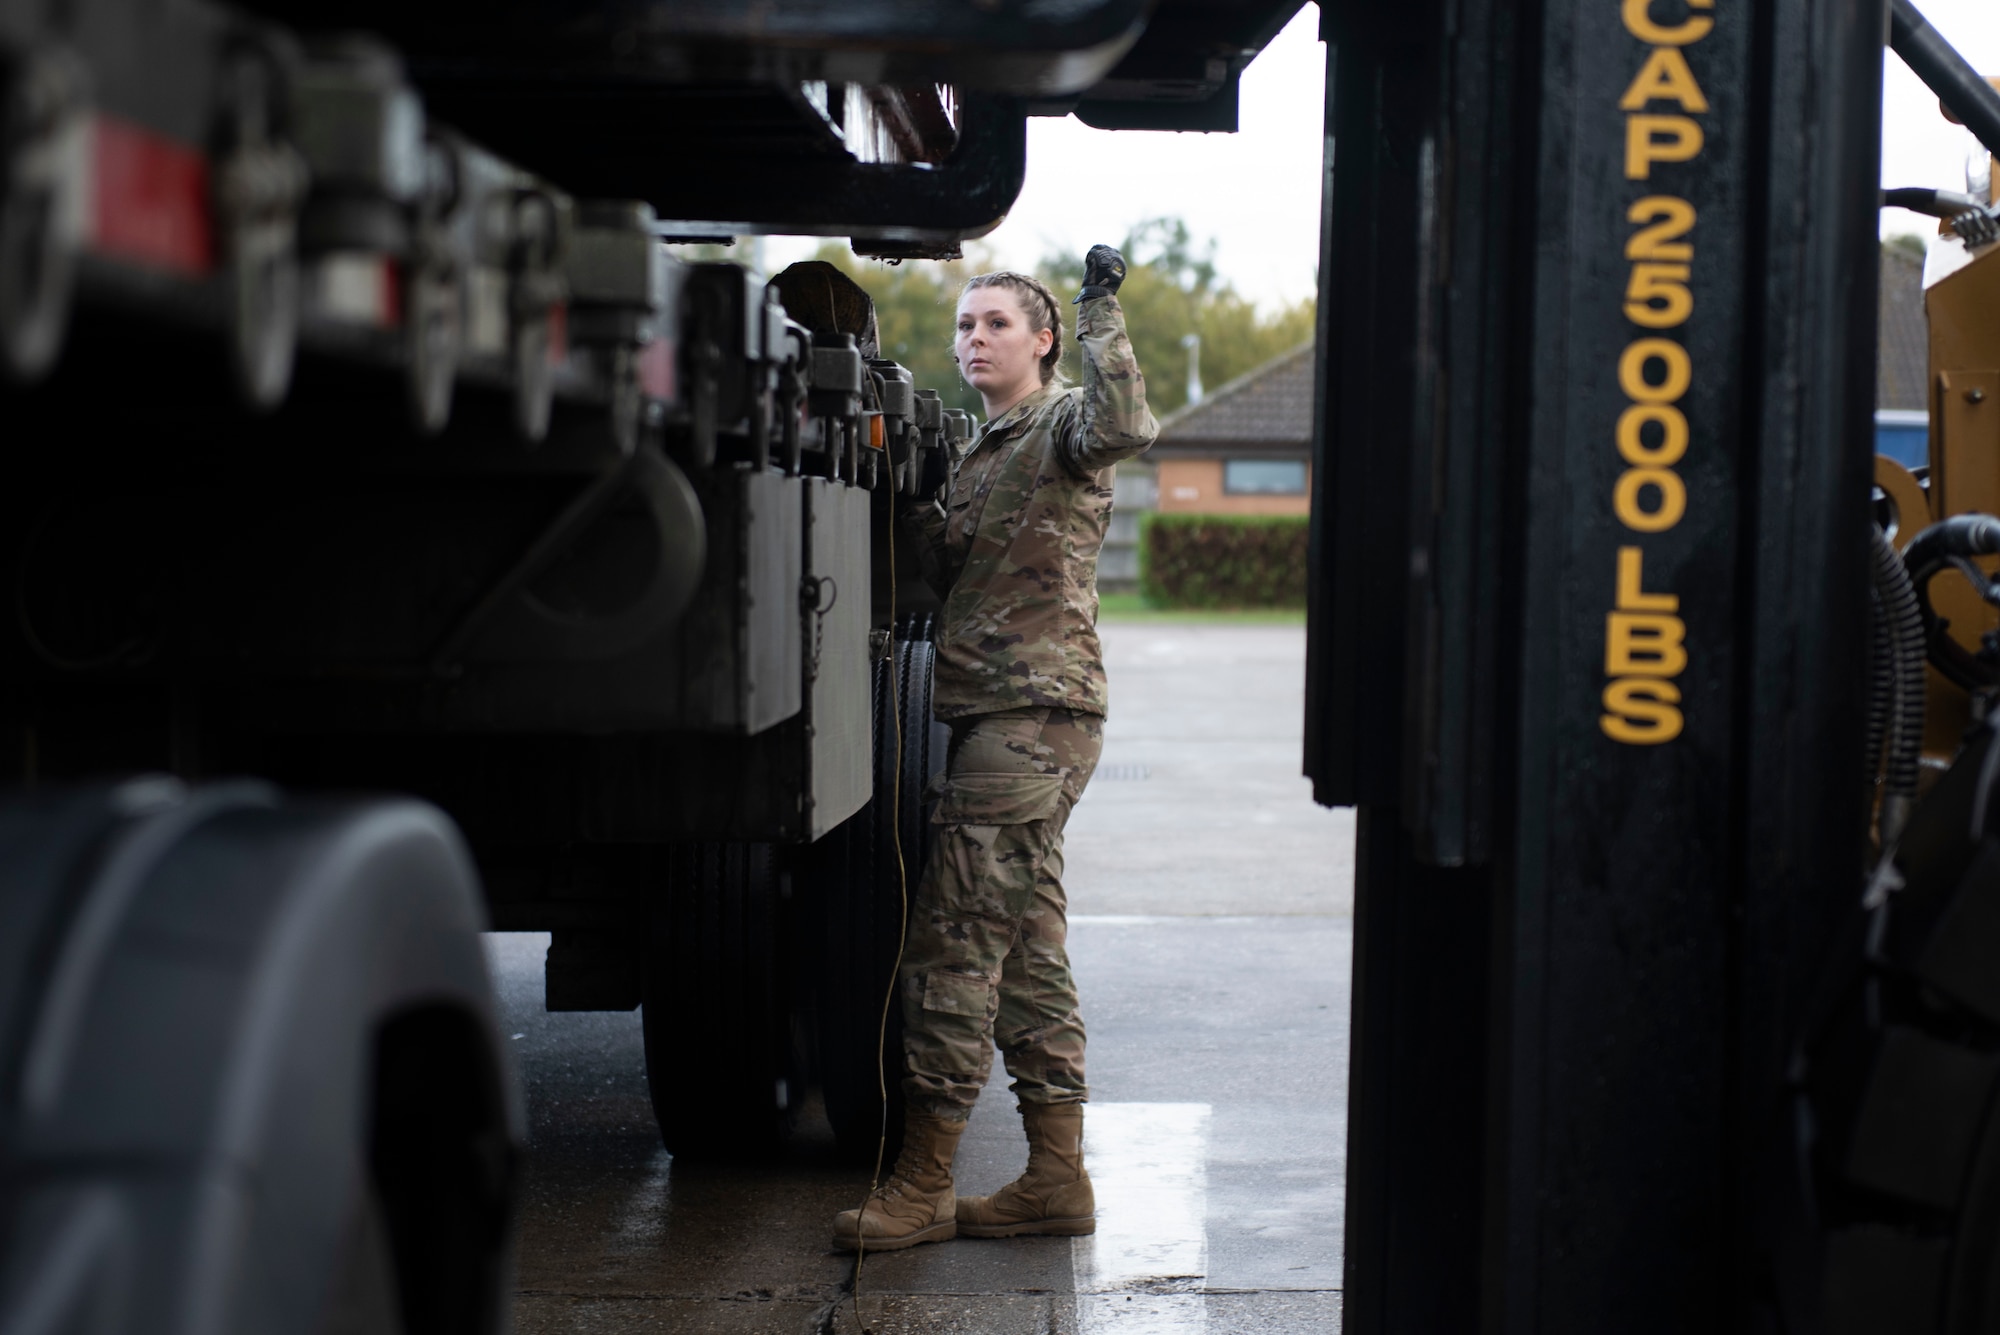 U.S. Air Force Airman 1st Class Kylie Gallivan, 48th Logistics Readiness Squadron ground transportation specialist, oversees the loading of heavy cargo at Royal Air Force Lakenheath, England, Oct 15, 2020. Ground transportation specialists must accumulate dozens of hours of driving experience to qualify on their vehicles. (U.S. Air Force photo by Airman 1st Class Anthony Clingerman)